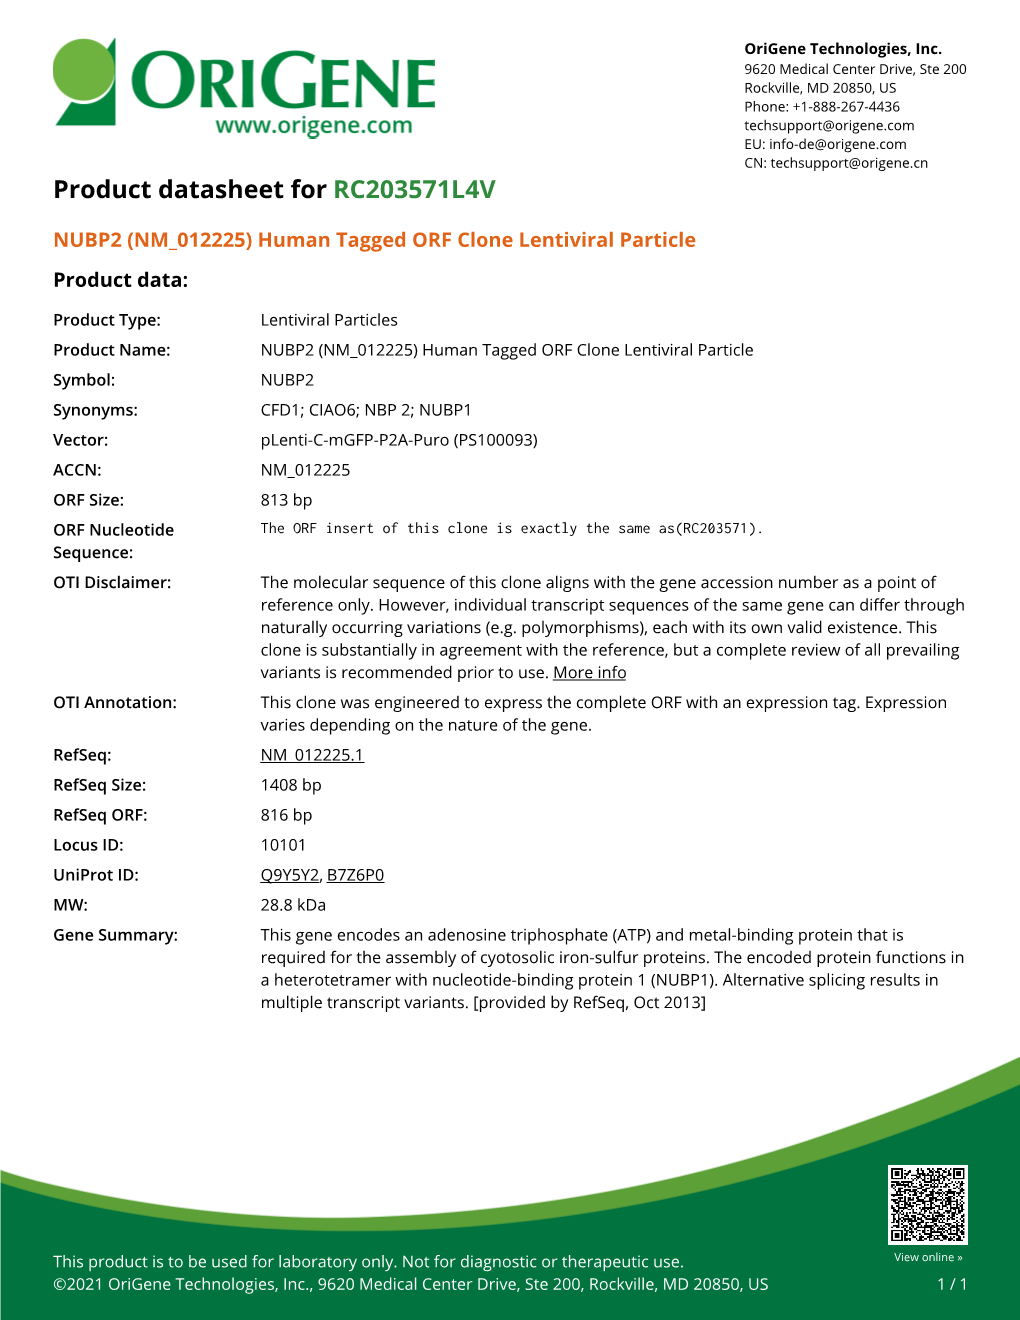 NUBP2 (NM 012225) Human Tagged ORF Clone Lentiviral Particle Product Data